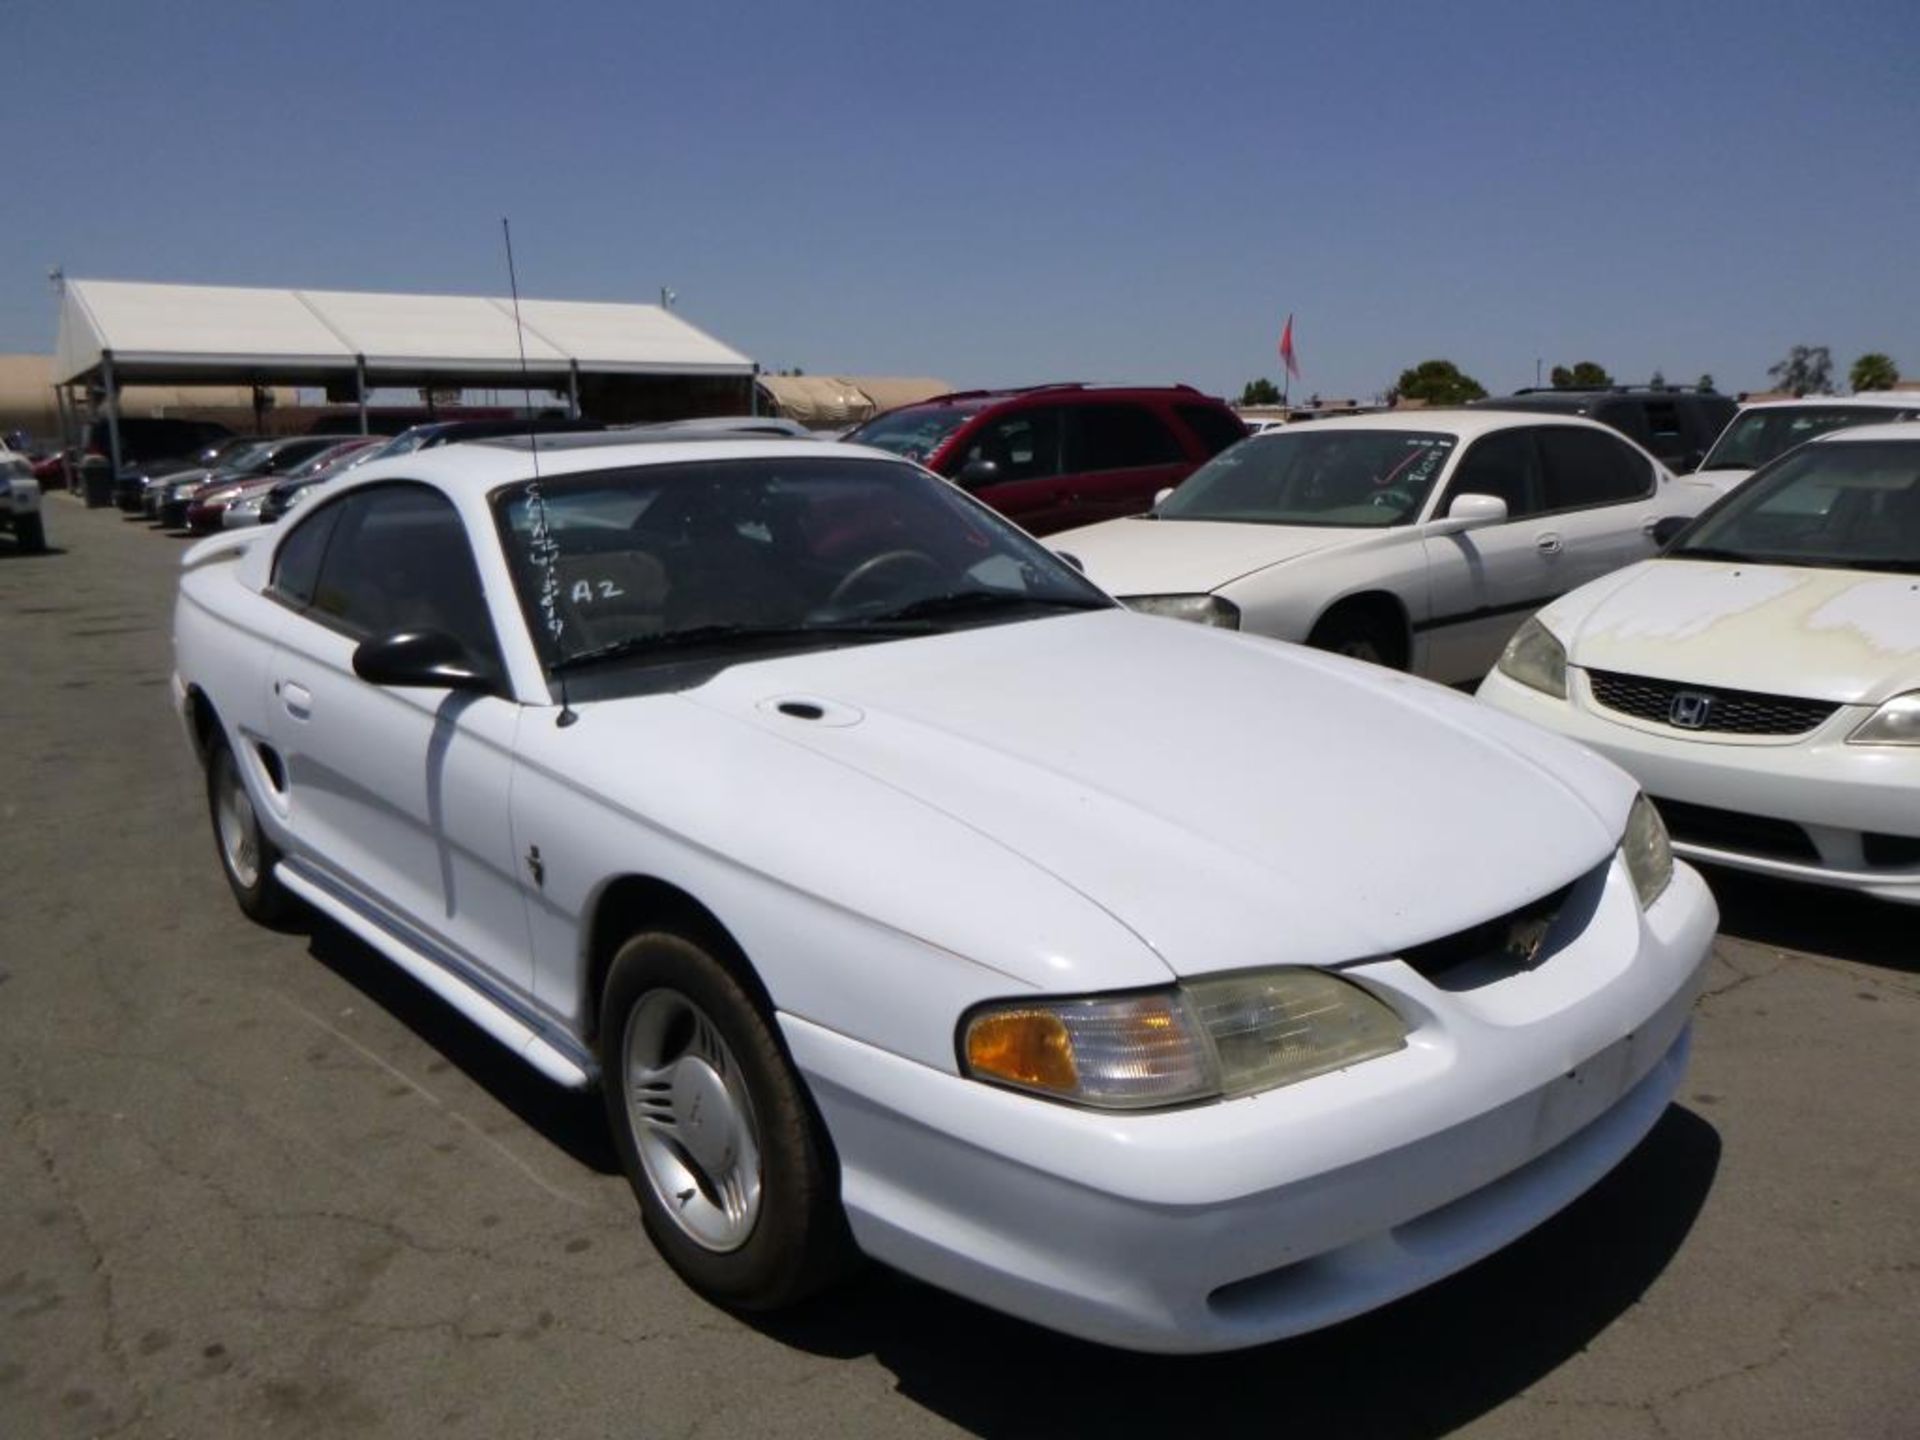 (Lot # 3370) 1995 Ford Mustang - Image 4 of 13